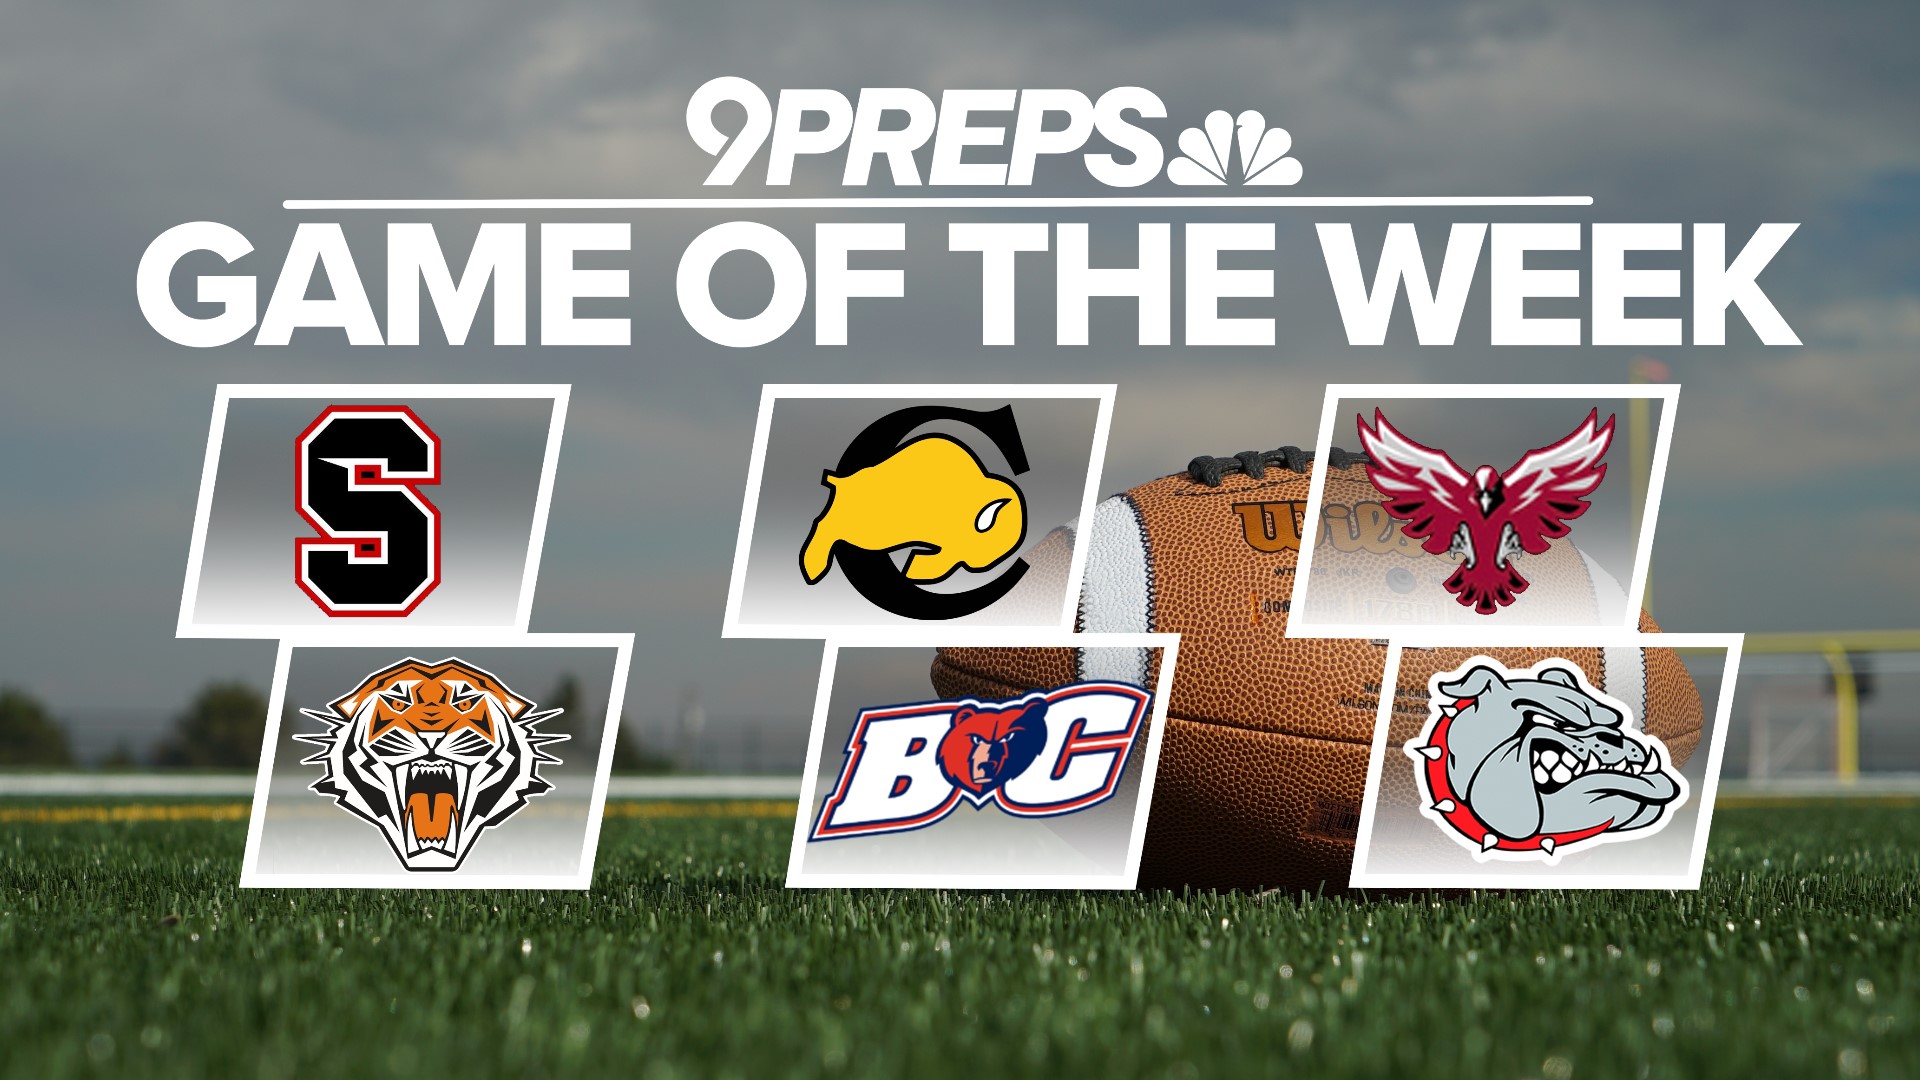 The 9Preps Game of the Week is back! Vote to determine which high school football game we showcase on Friday, September 23.